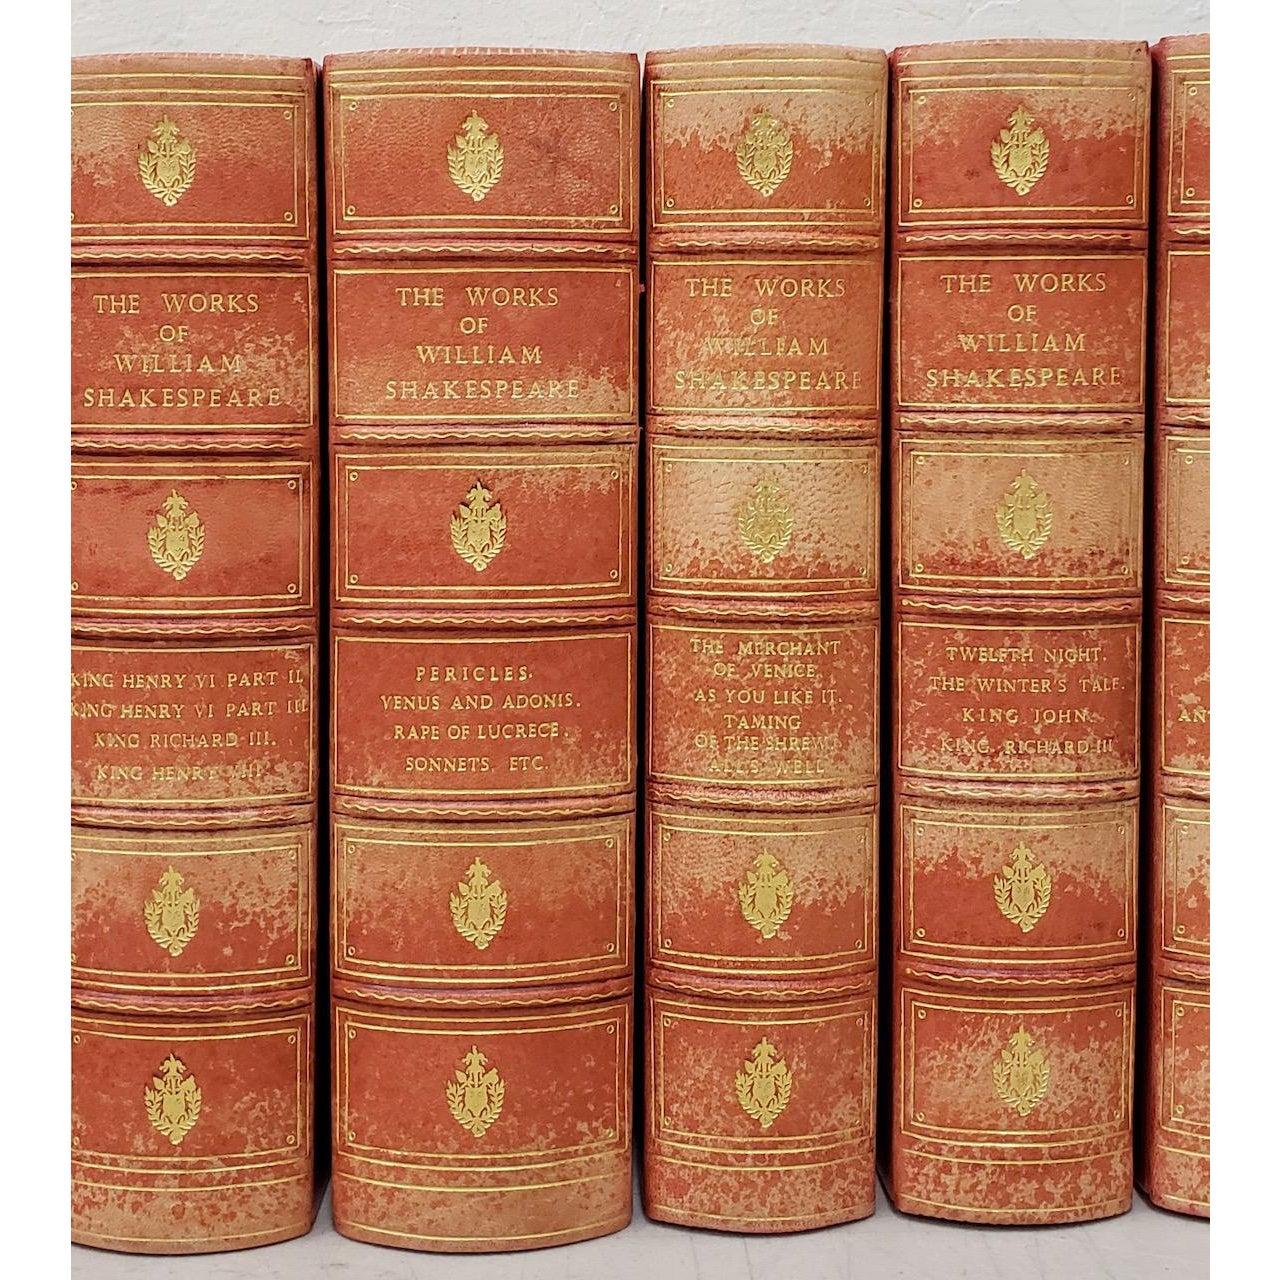 19th century Shakespeare 10 volumes, circa 1894

Edited by William Aldis Wright

Macmillan and Co., London and New York

Each volume measures 7